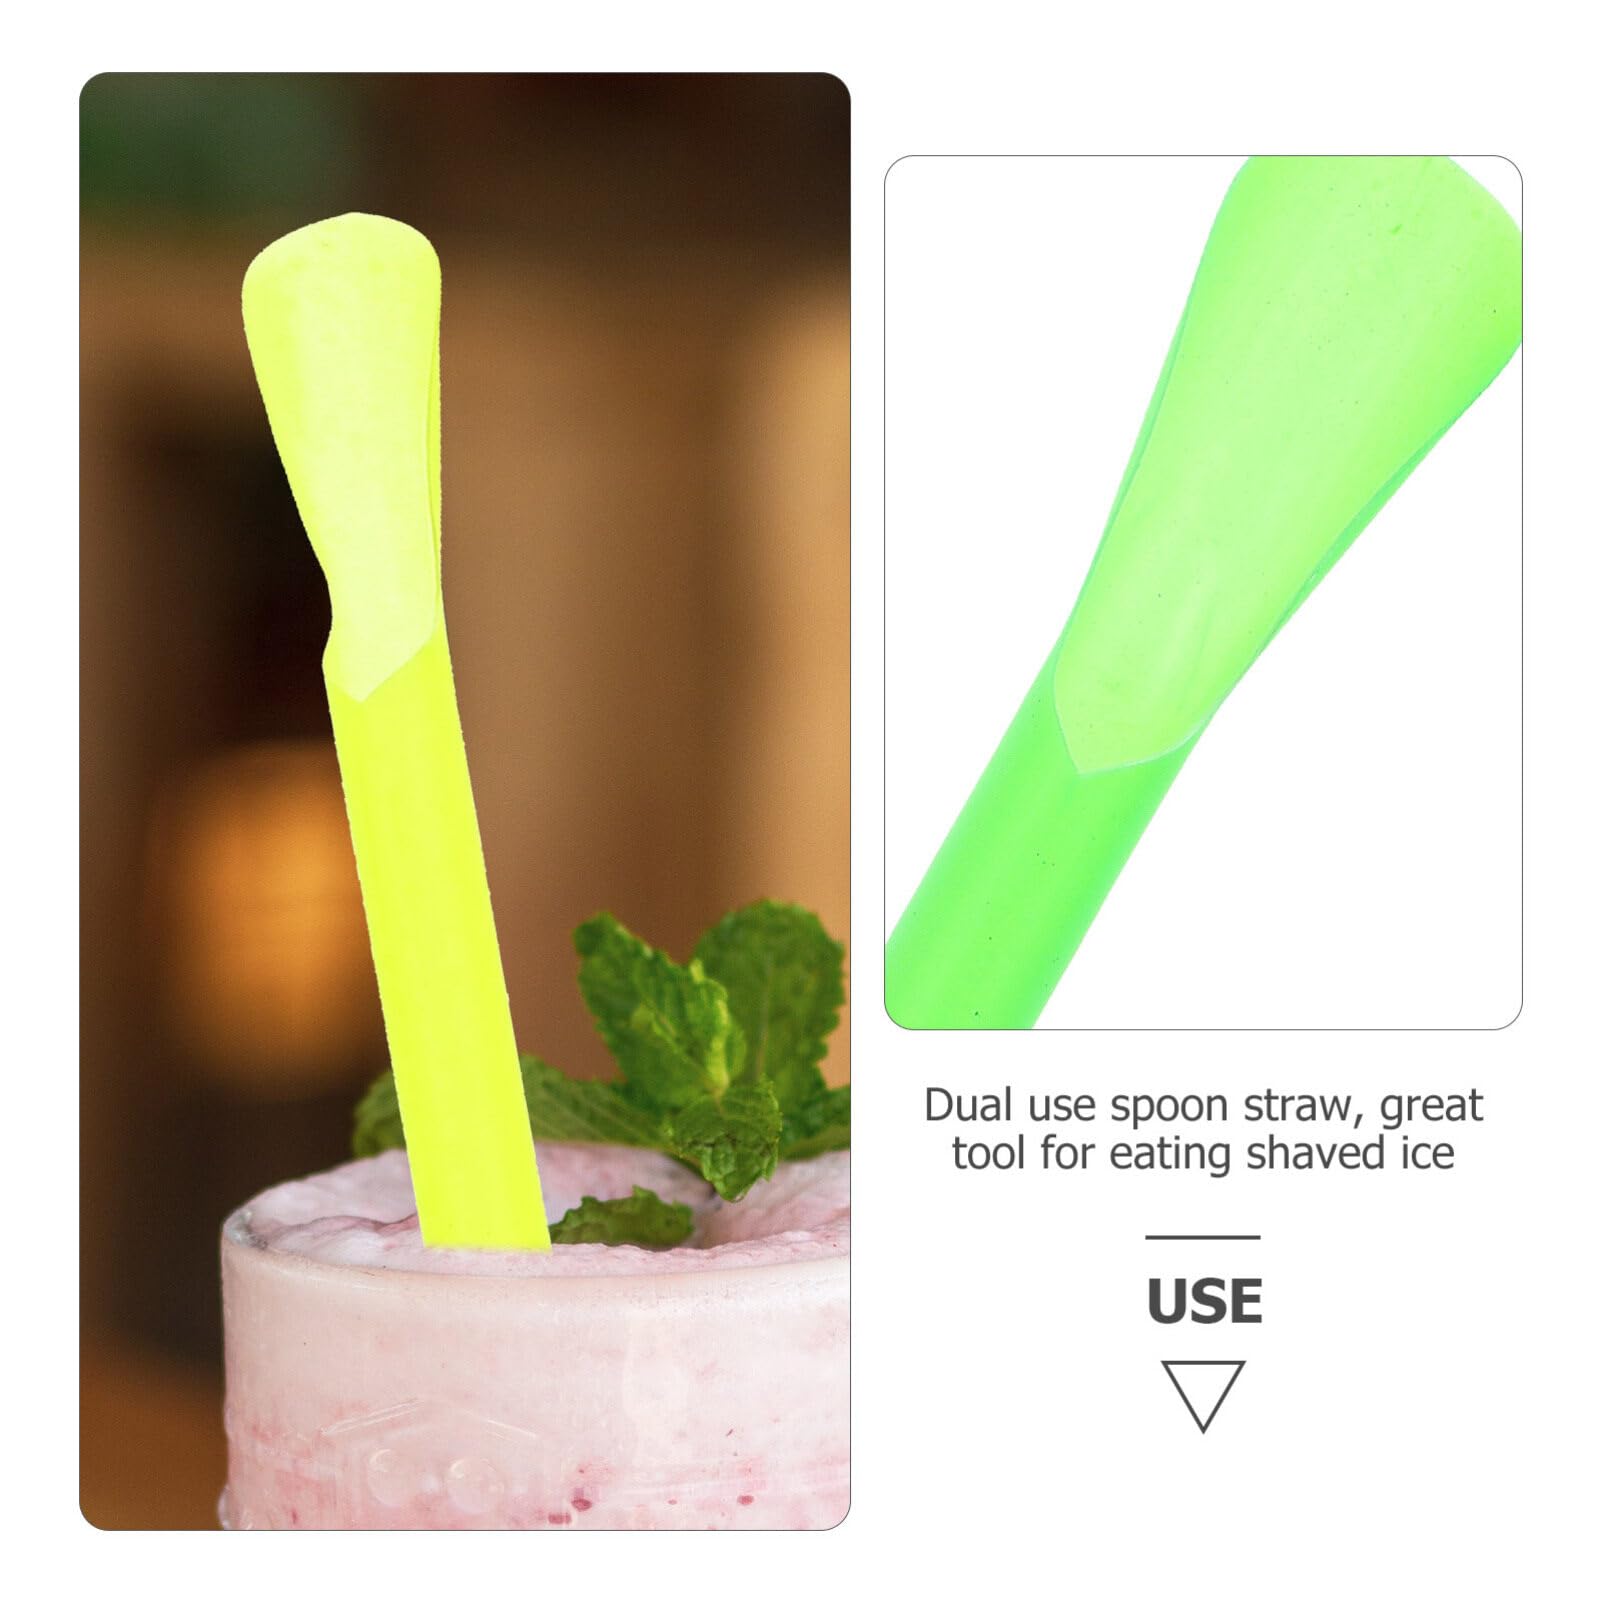 Plastic Straws 150pcs Disposable Spoon Straws Dual Use Drinking Spoon Straw for Milkshakes Shaved Ice (Mixed Color) Straws Disposable